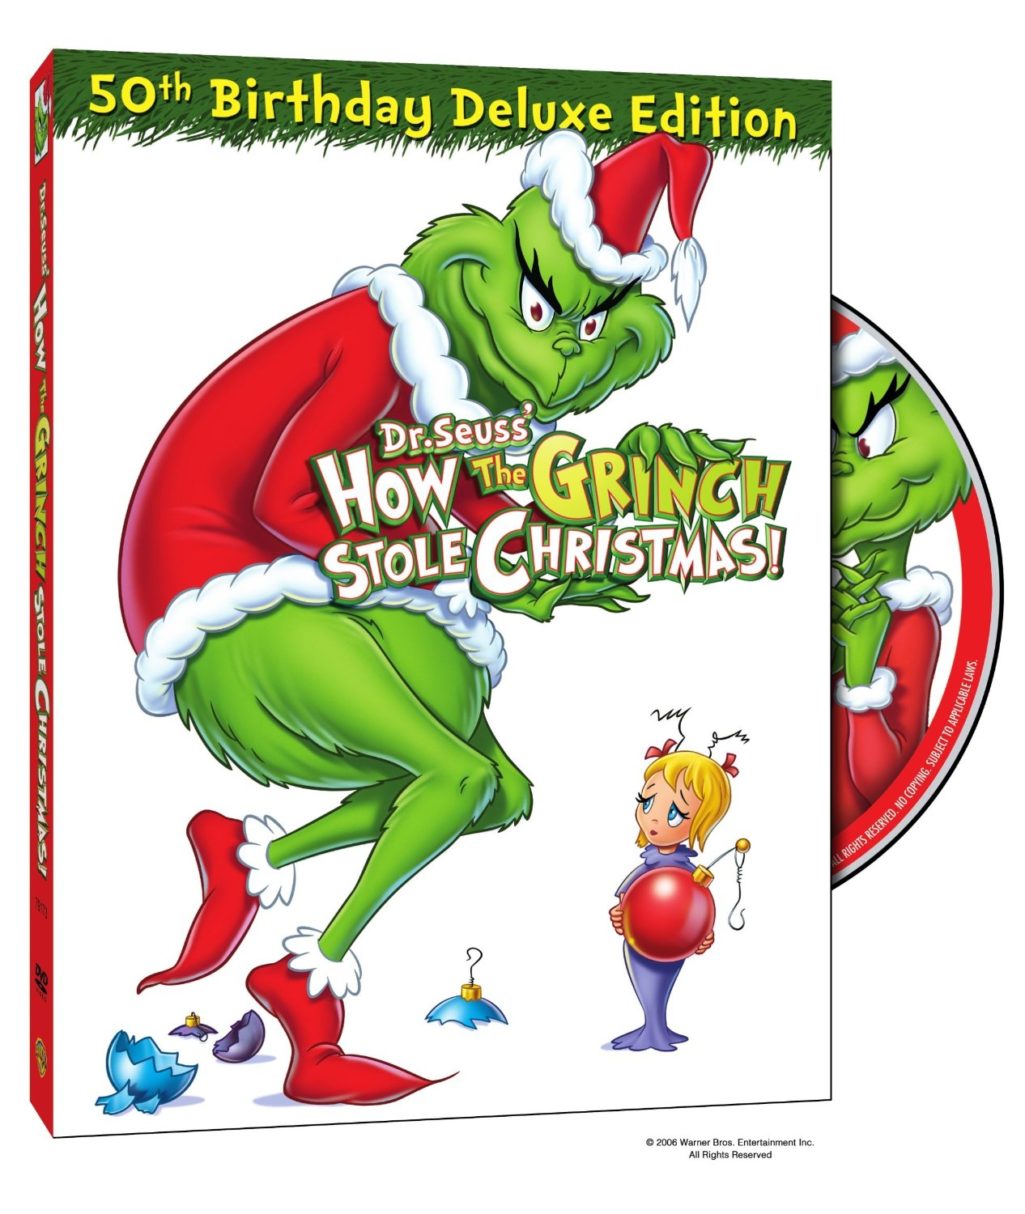 DVD of How the Grinch Stole Christmas